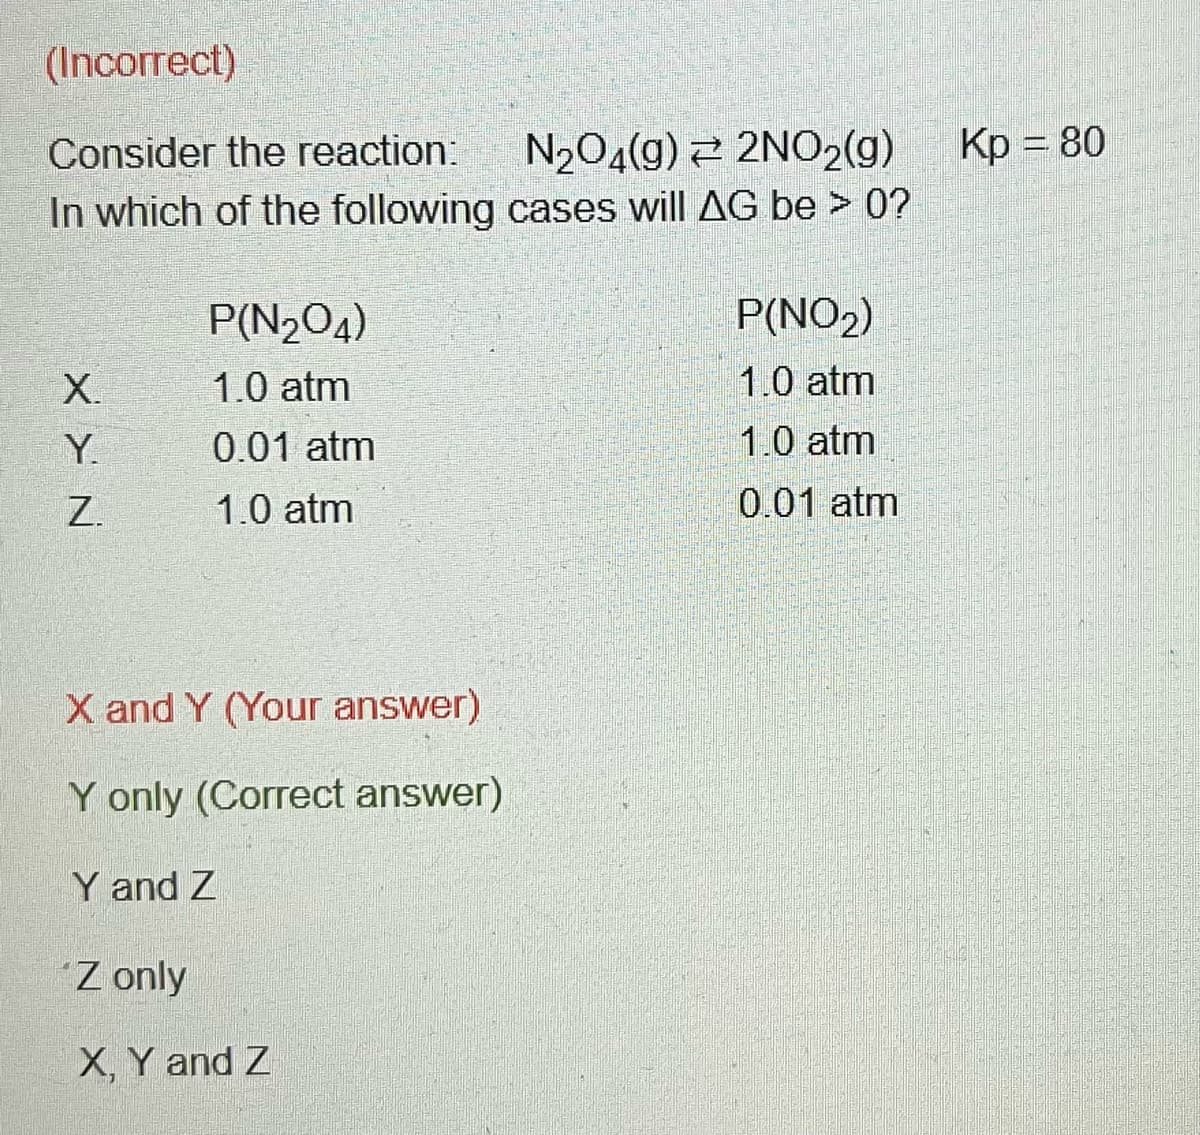 (Incorrect)
Consider the reaction:
N₂O4(9) + 2NO₂(g)
In which of the following cases will AG be > 0?
X > N
X.
Y.
P(N₂O4)
1.0 atm
0.01 atm
1.0 atm
X and Y (Your answer)
Y only (Correct answer)
Y and Z
Z only
X, Y and Z
P(NO₂)
1.0 atm
1.0 atm
0.01 atm
Kp = 80